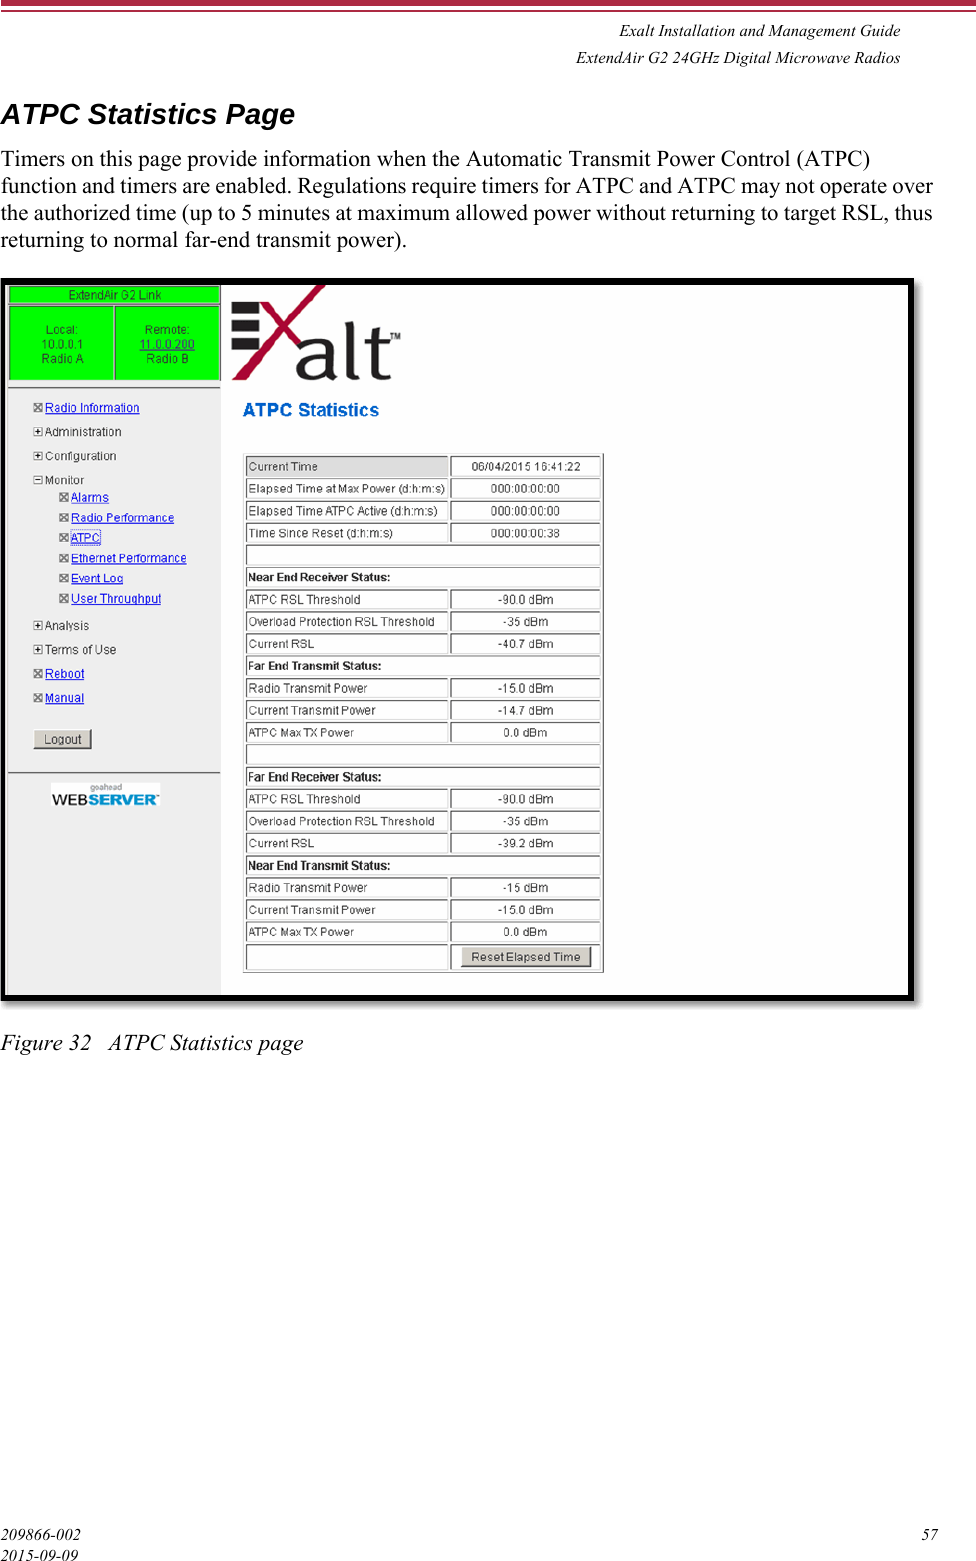 Exalt Installation and Management GuideExtendAir G2 24GHz Digital Microwave Radios209866-002 572015-09-09ATPC Statistics PageTimers on this page provide information when the Automatic Transmit Power Control (ATPC) function and timers are enabled. Regulations require timers for ATPC and ATPC may not operate over the authorized time (up to 5 minutes at maximum allowed power without returning to target RSL, thus returning to normal far-end transmit power). Figure 32   ATPC Statistics page